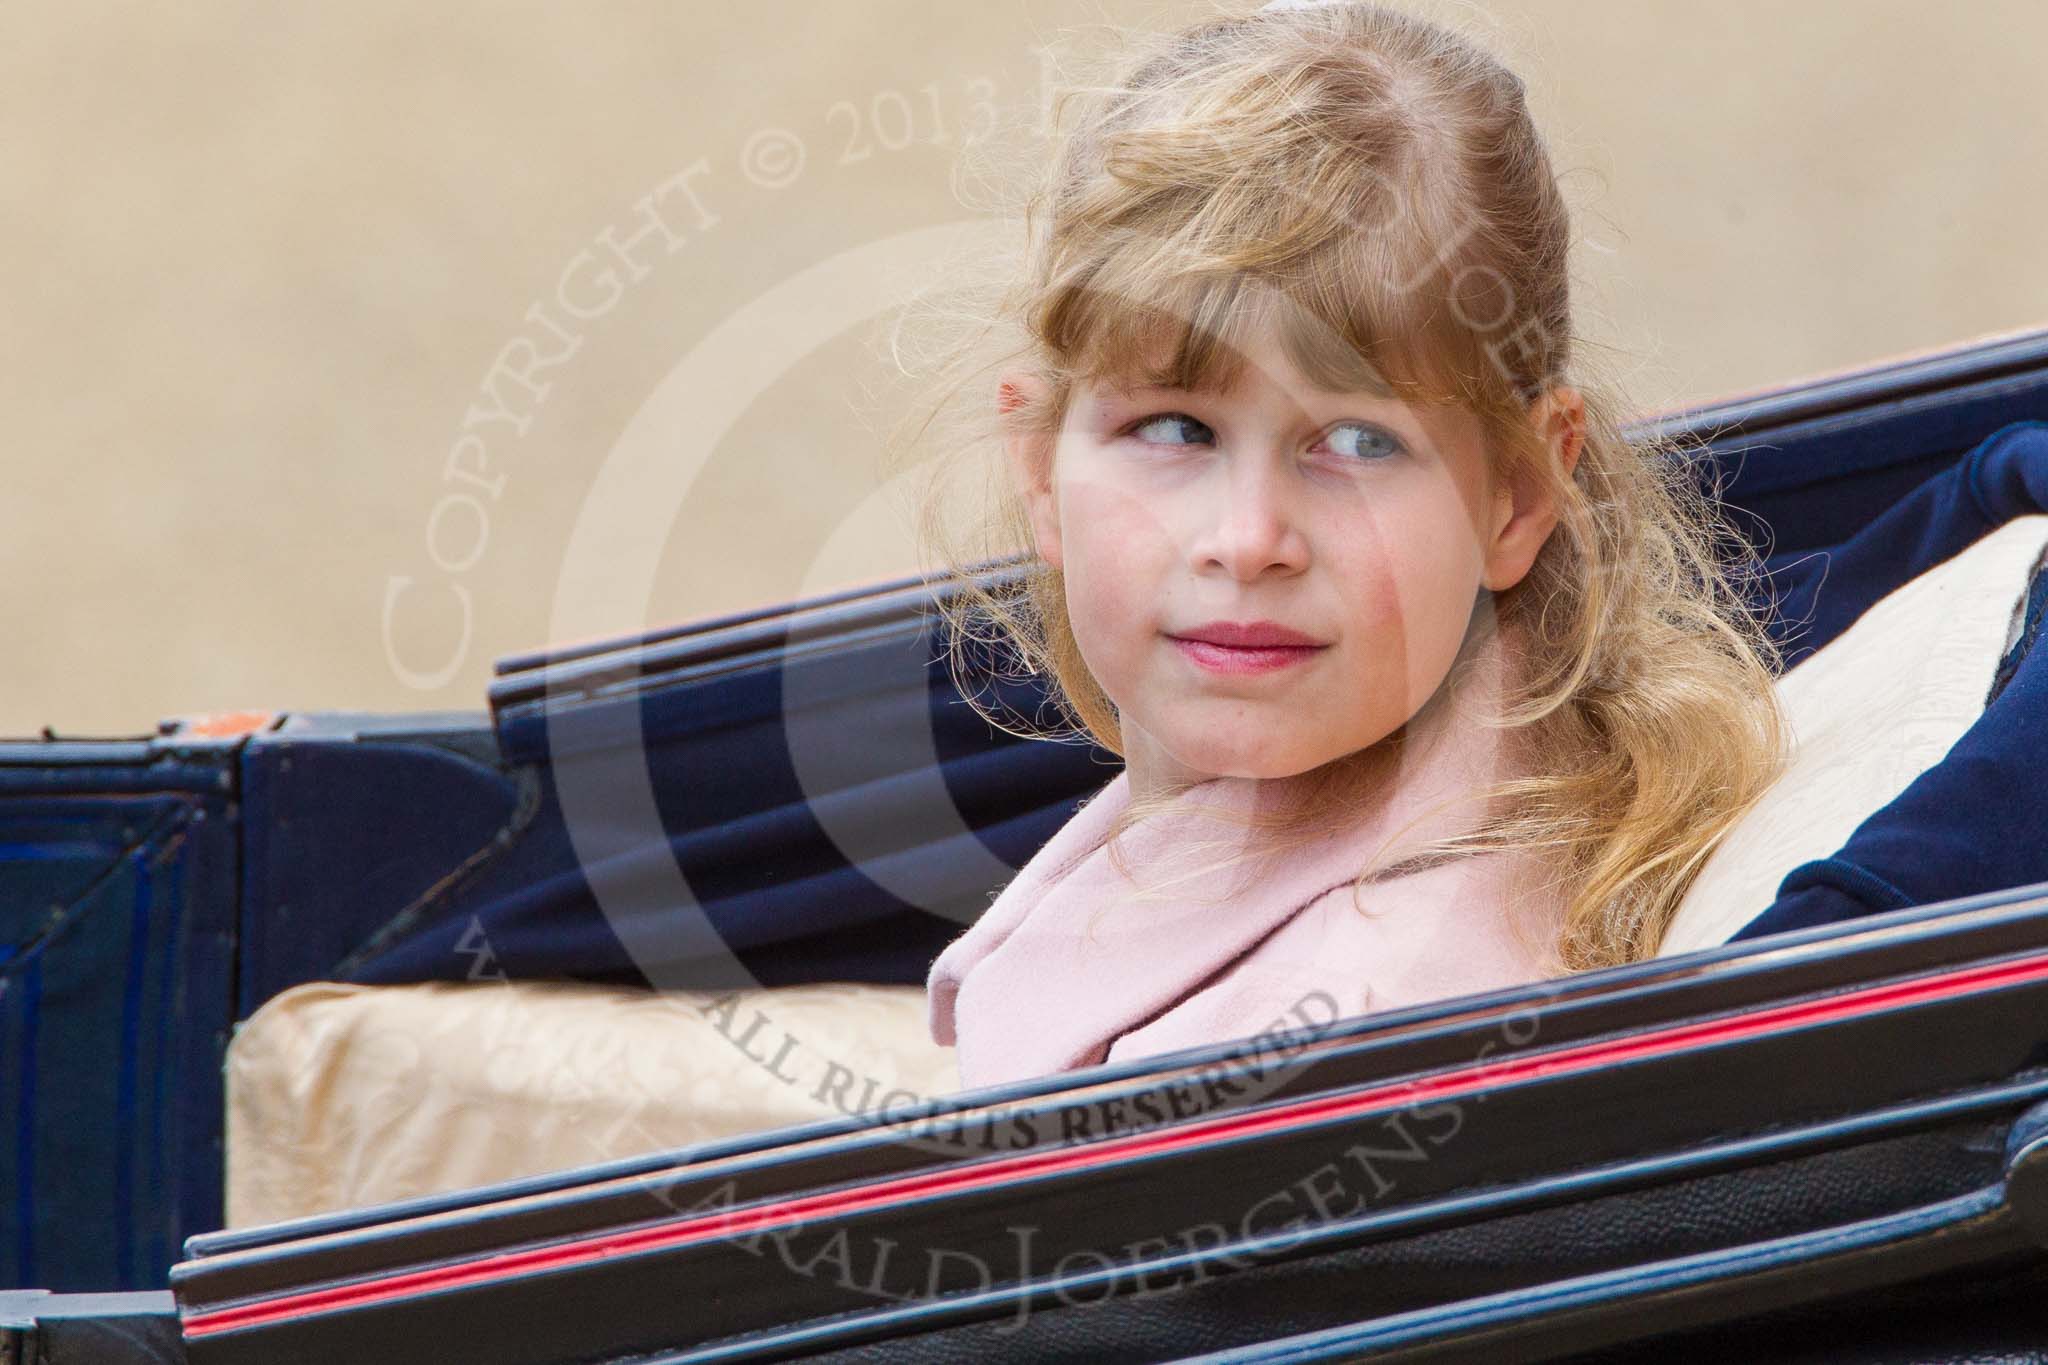 Trooping the Colour 2013: Lady Louise Windsor, the daughter of HRH The Countess of Wessex and HRH The Earl of Wessex in the third barouche carriage on the way across Horse Guards Parade to watch the parade from the Major General's office..
Horse Guards Parade, Westminster,
London SW1,

United Kingdom,
on 15 June 2013 at 10:51, image #217